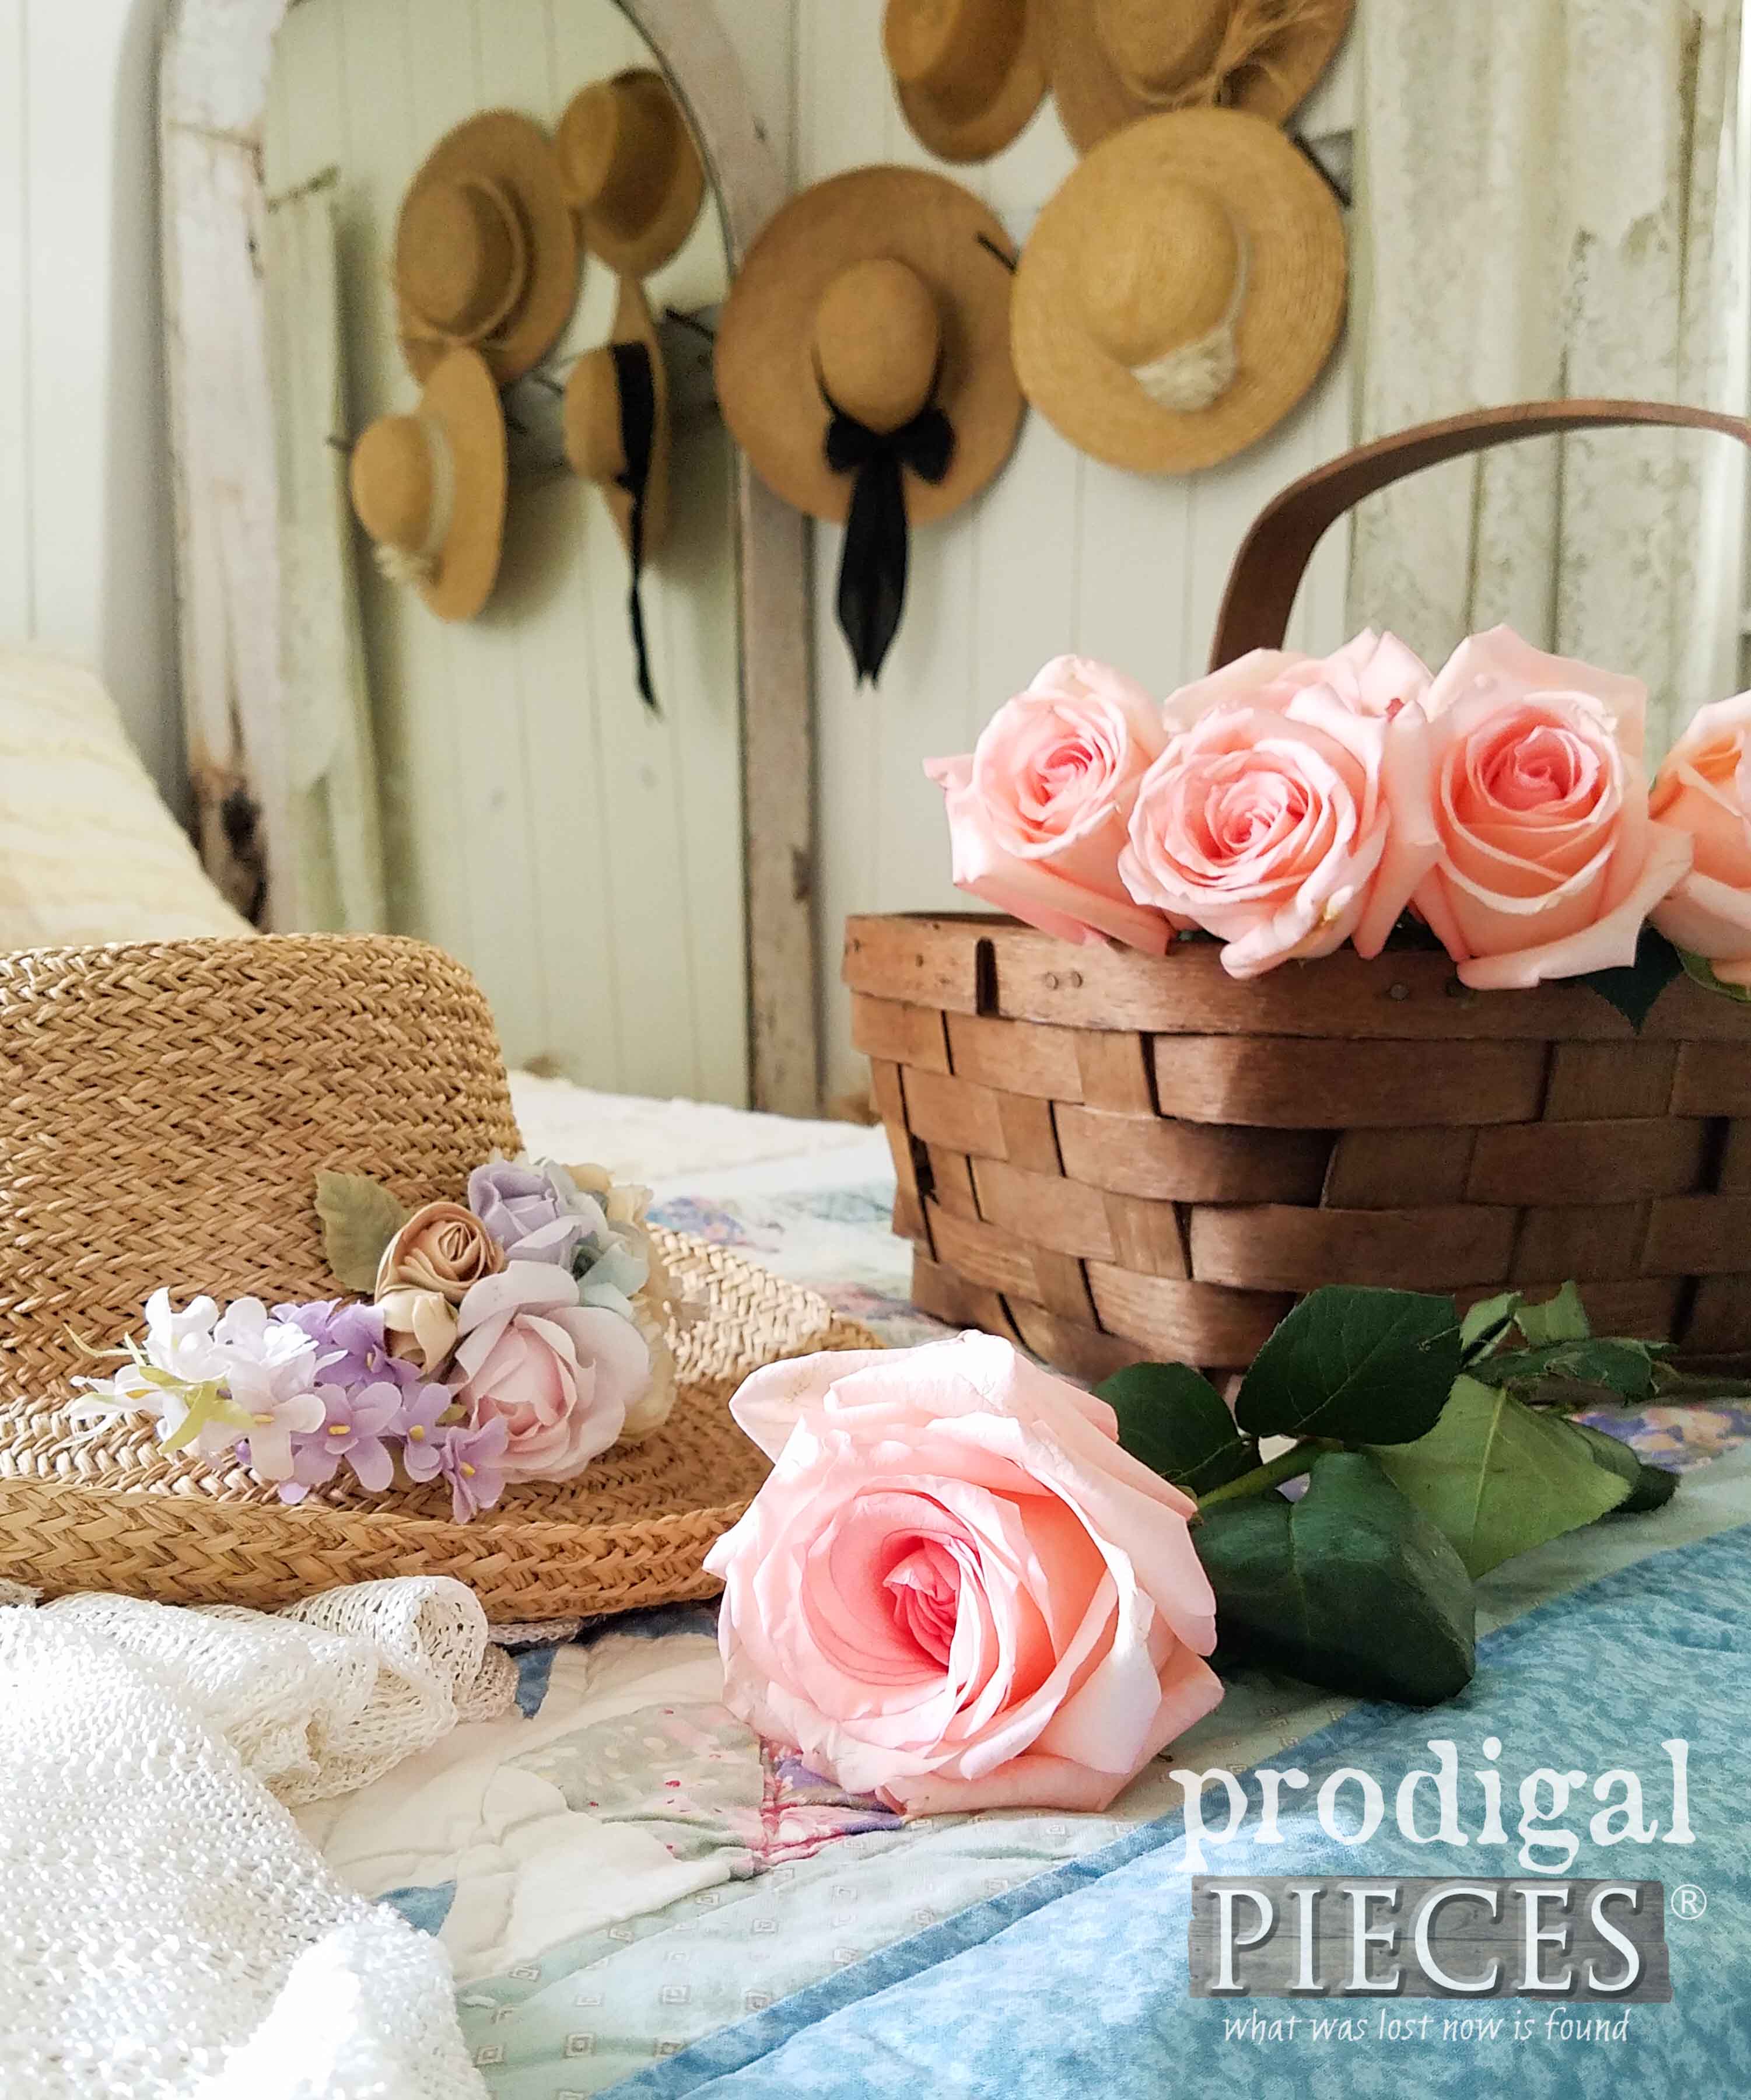 Basket of Pink Roses in Cottage Style Bedroom by Larissa of Prodigal Pieces | prodigapieces.com